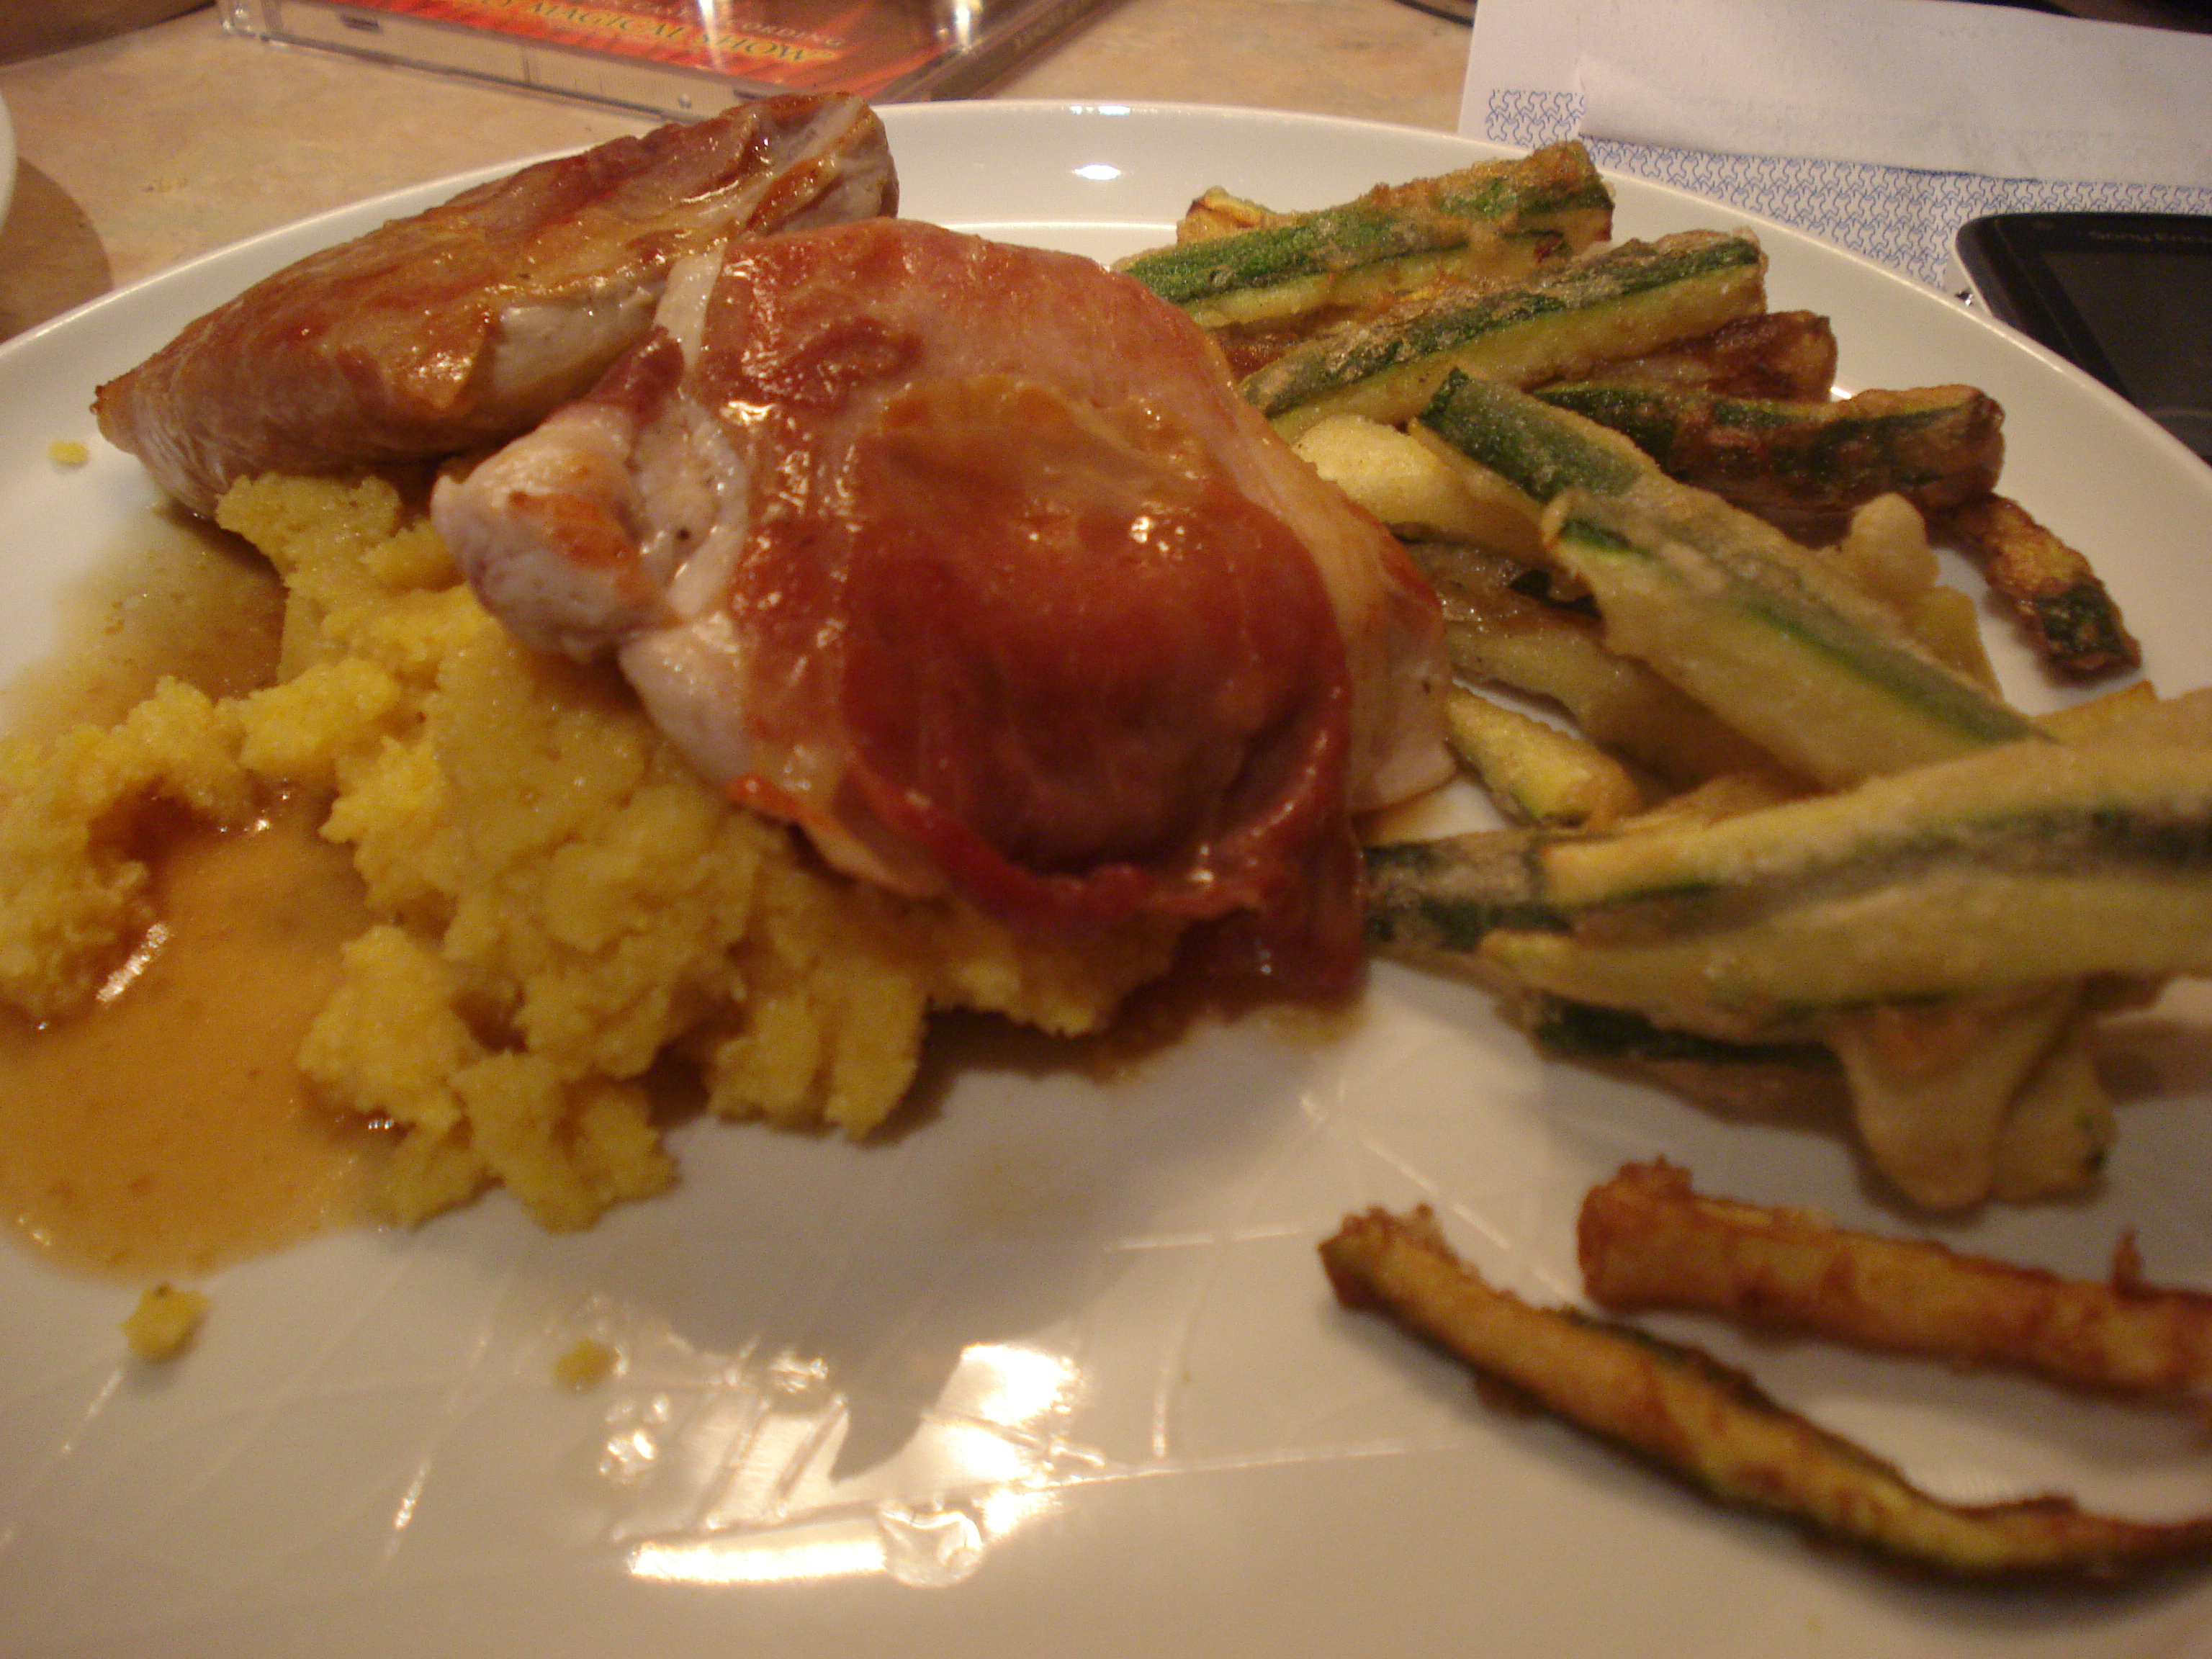 turkey and veal saltimbocca with polenta and courgette fries